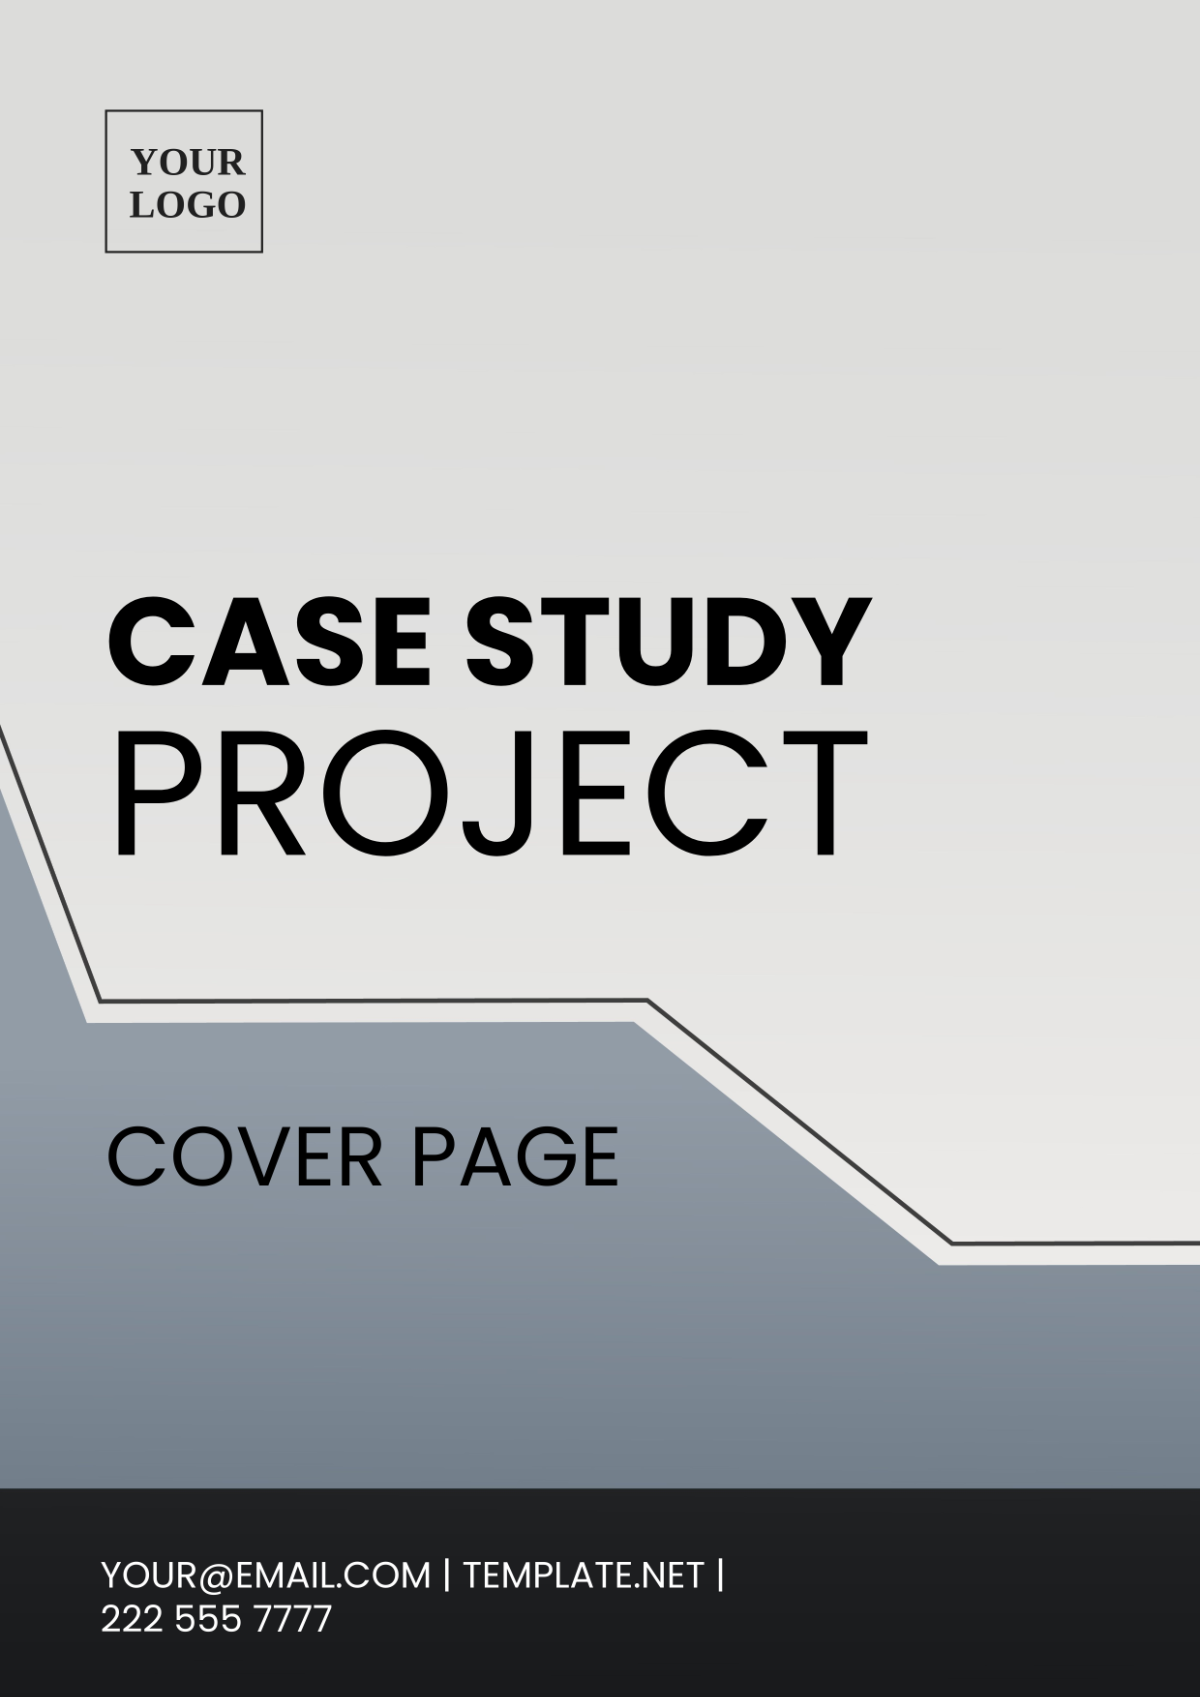 Case Study Project Cover Page